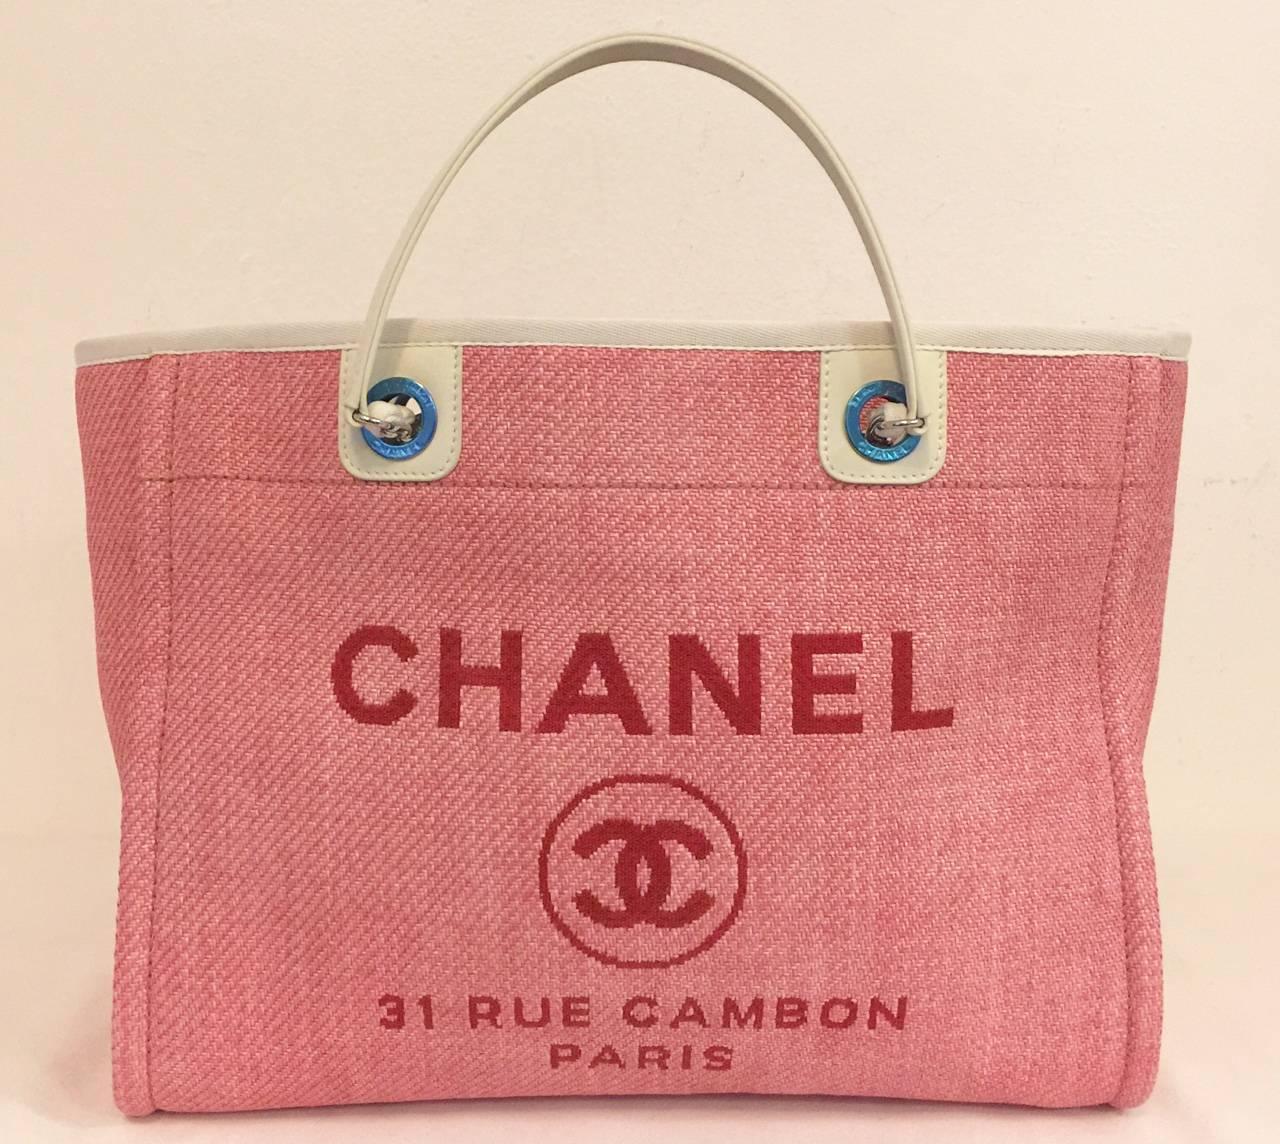 Introduced in 2012 as part of the Deauville Ligne Collection, this Chanel Pink Tote  has become highly coveted by connoisseurs of all things Coco!  Features the address of Mademoiselle's Cambon boutique, as well as the iconic double "C"